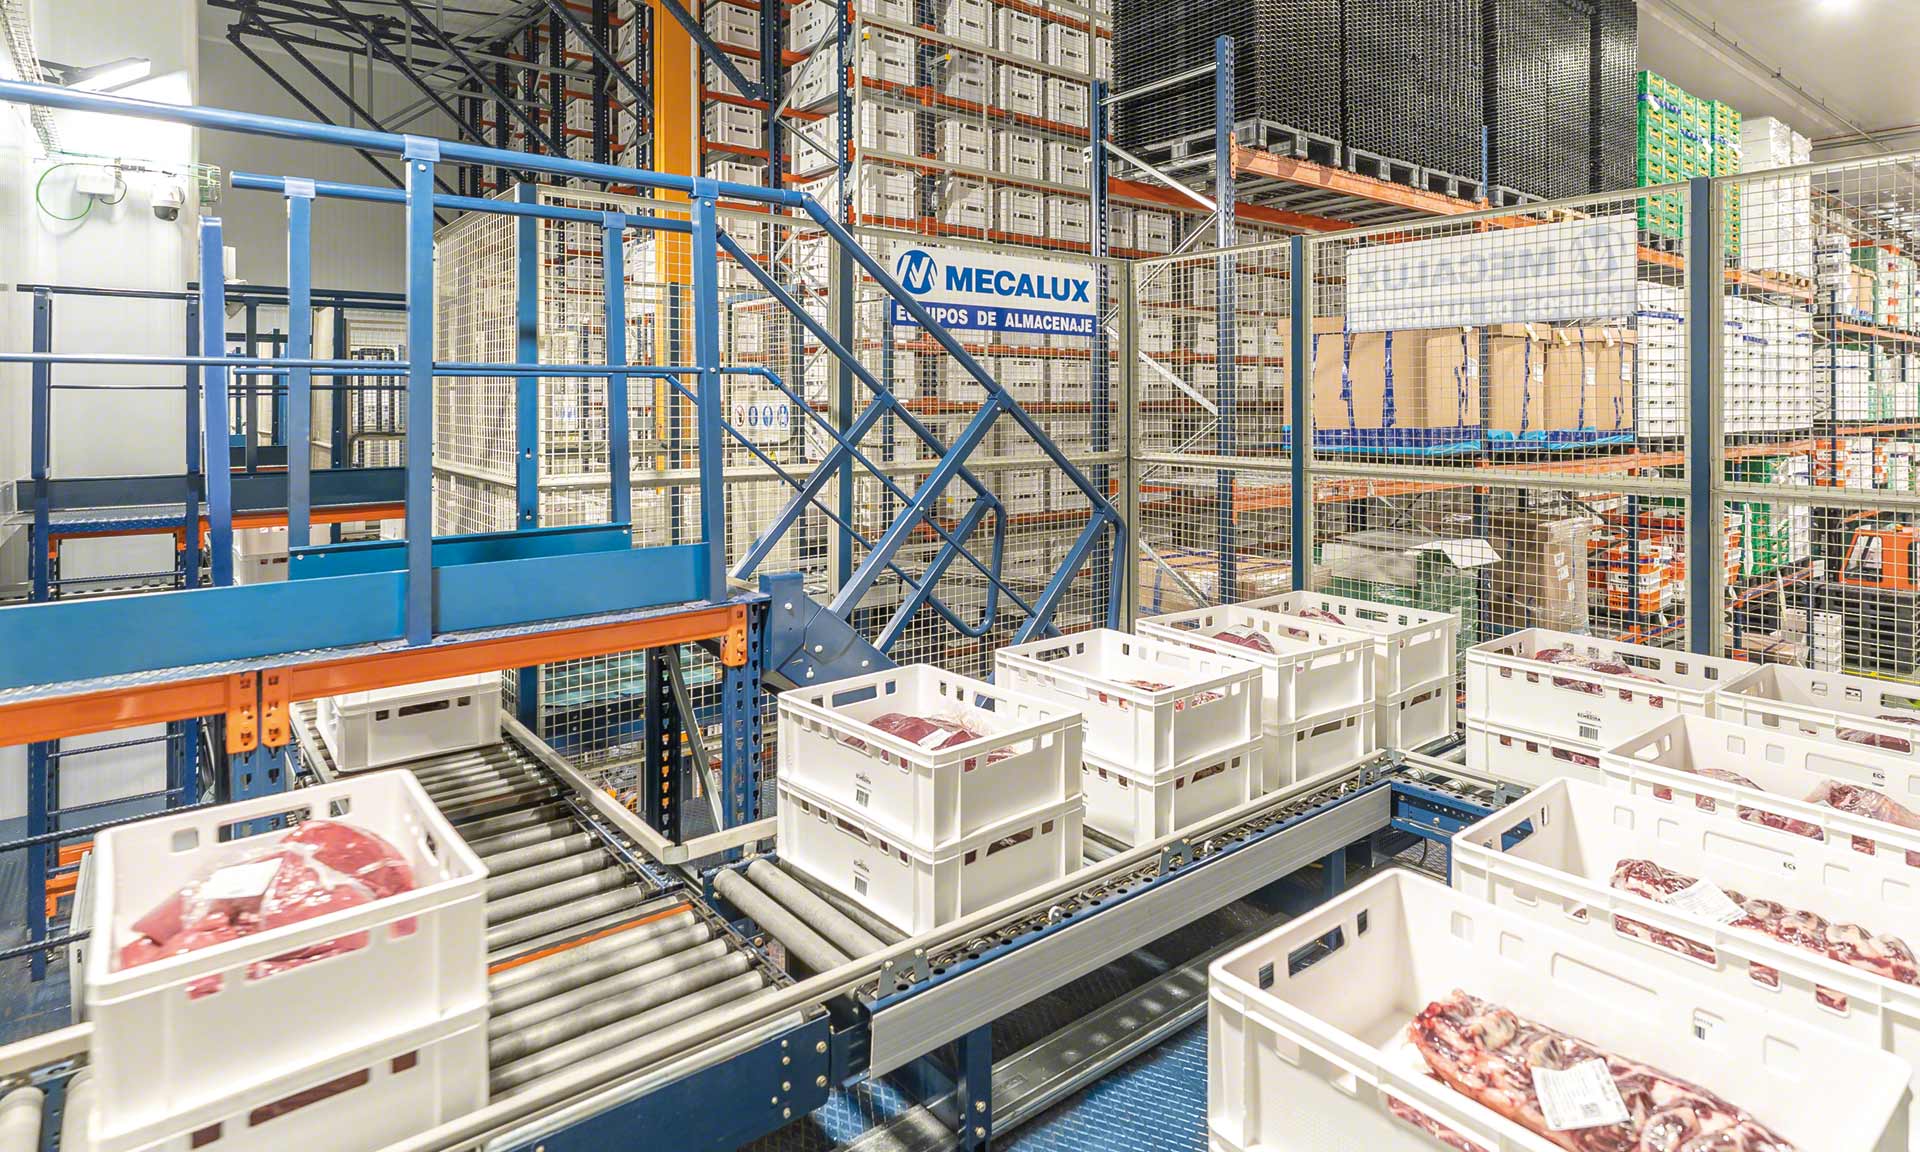 Food warehouse automation ensures improved energy management and tight stock control